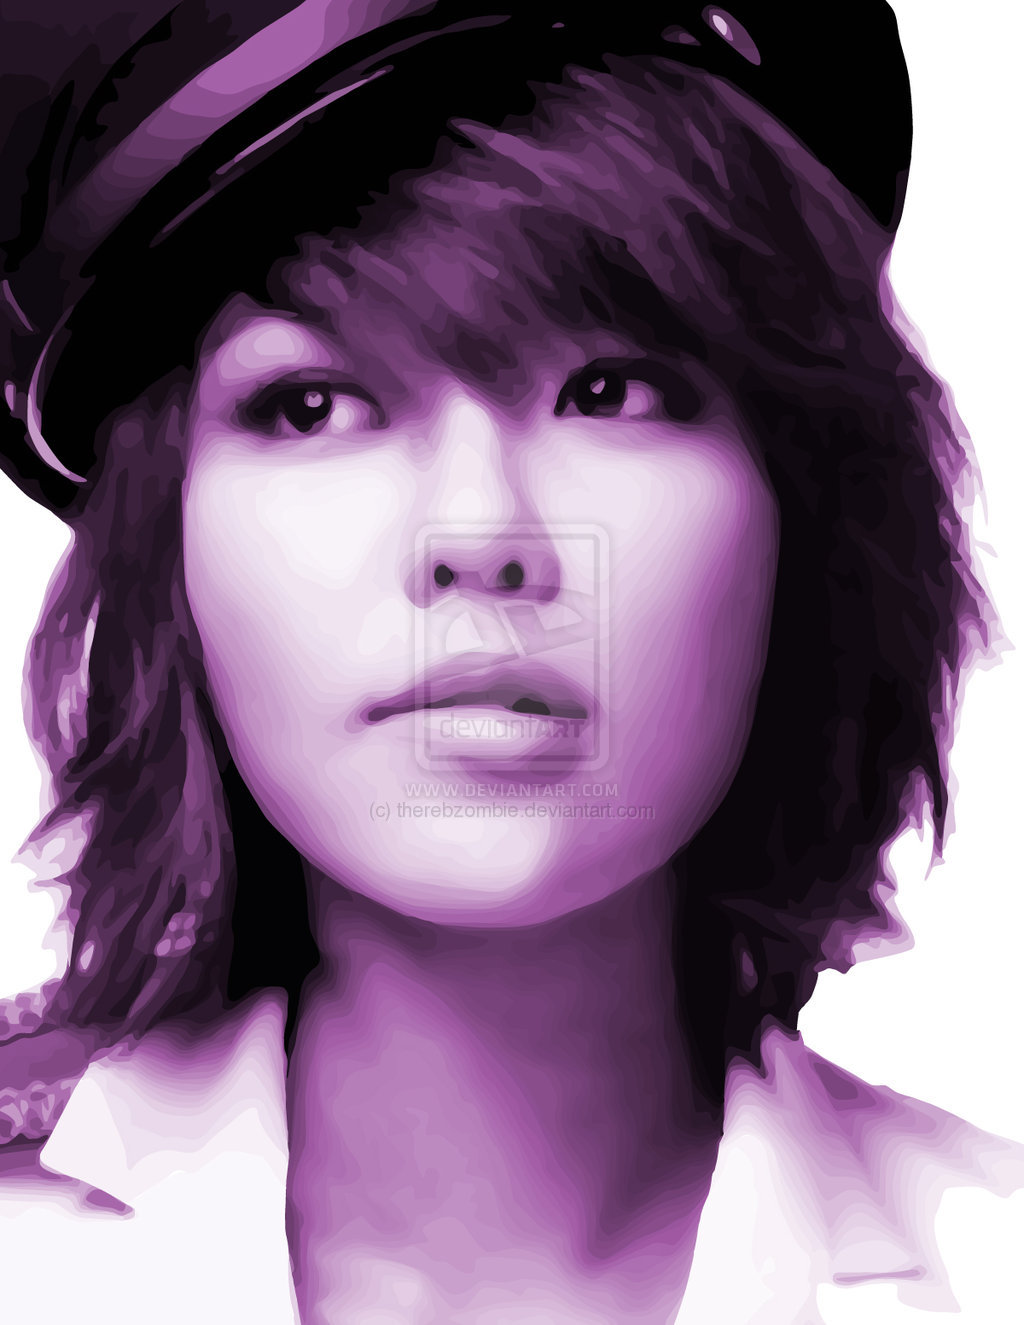 Snsd Sooyoung By Therebzombie